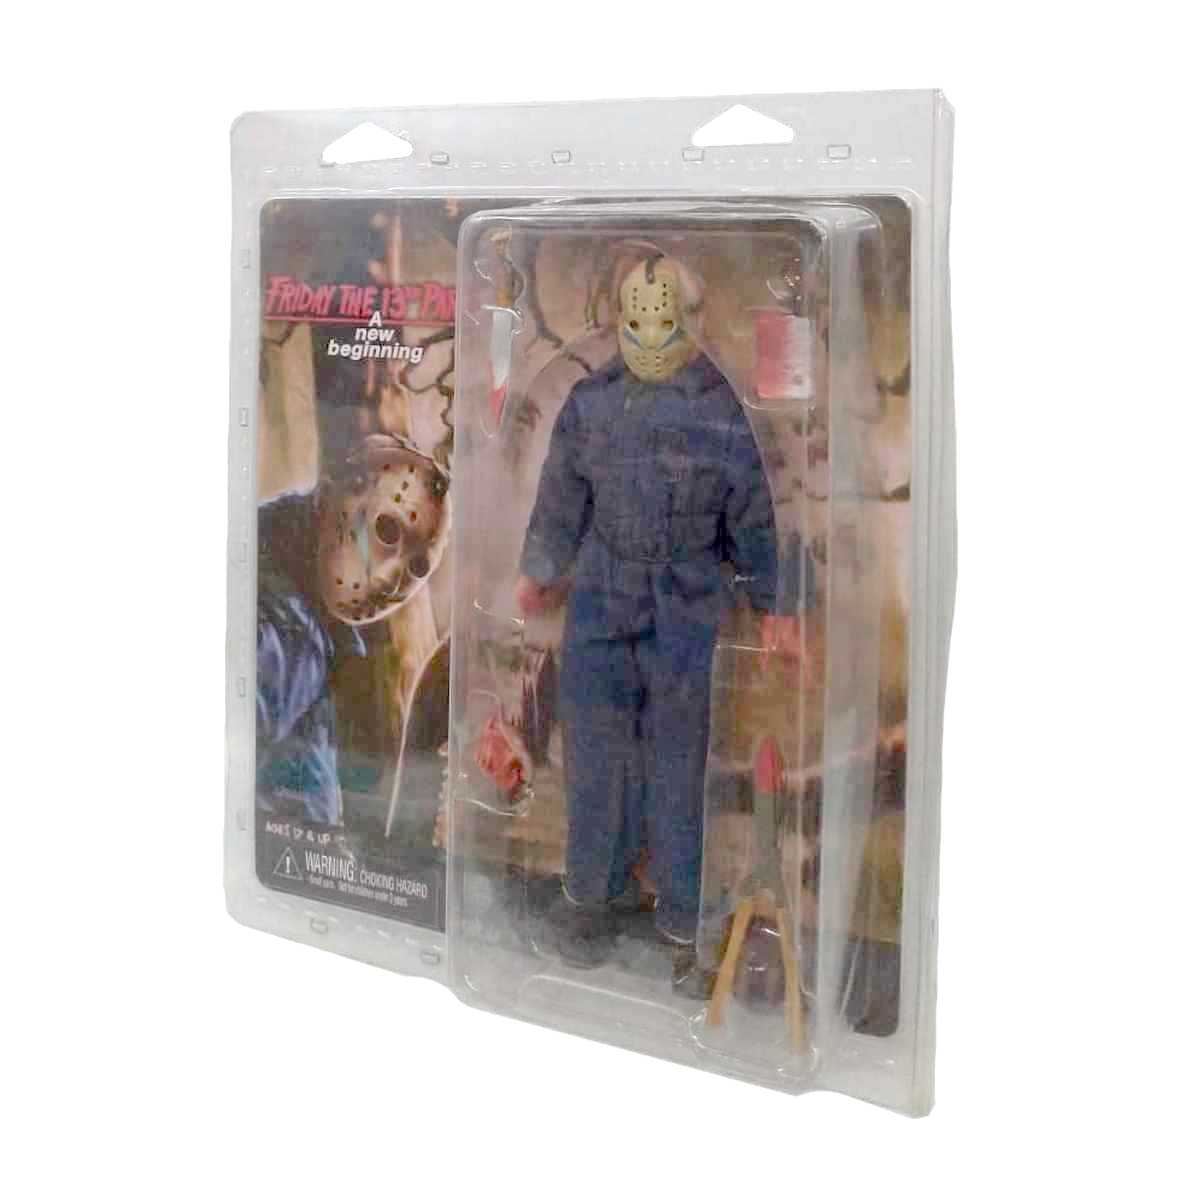 FRIDAY THE 13TH PART V New Beginning Jason Voorhees action figure NECA